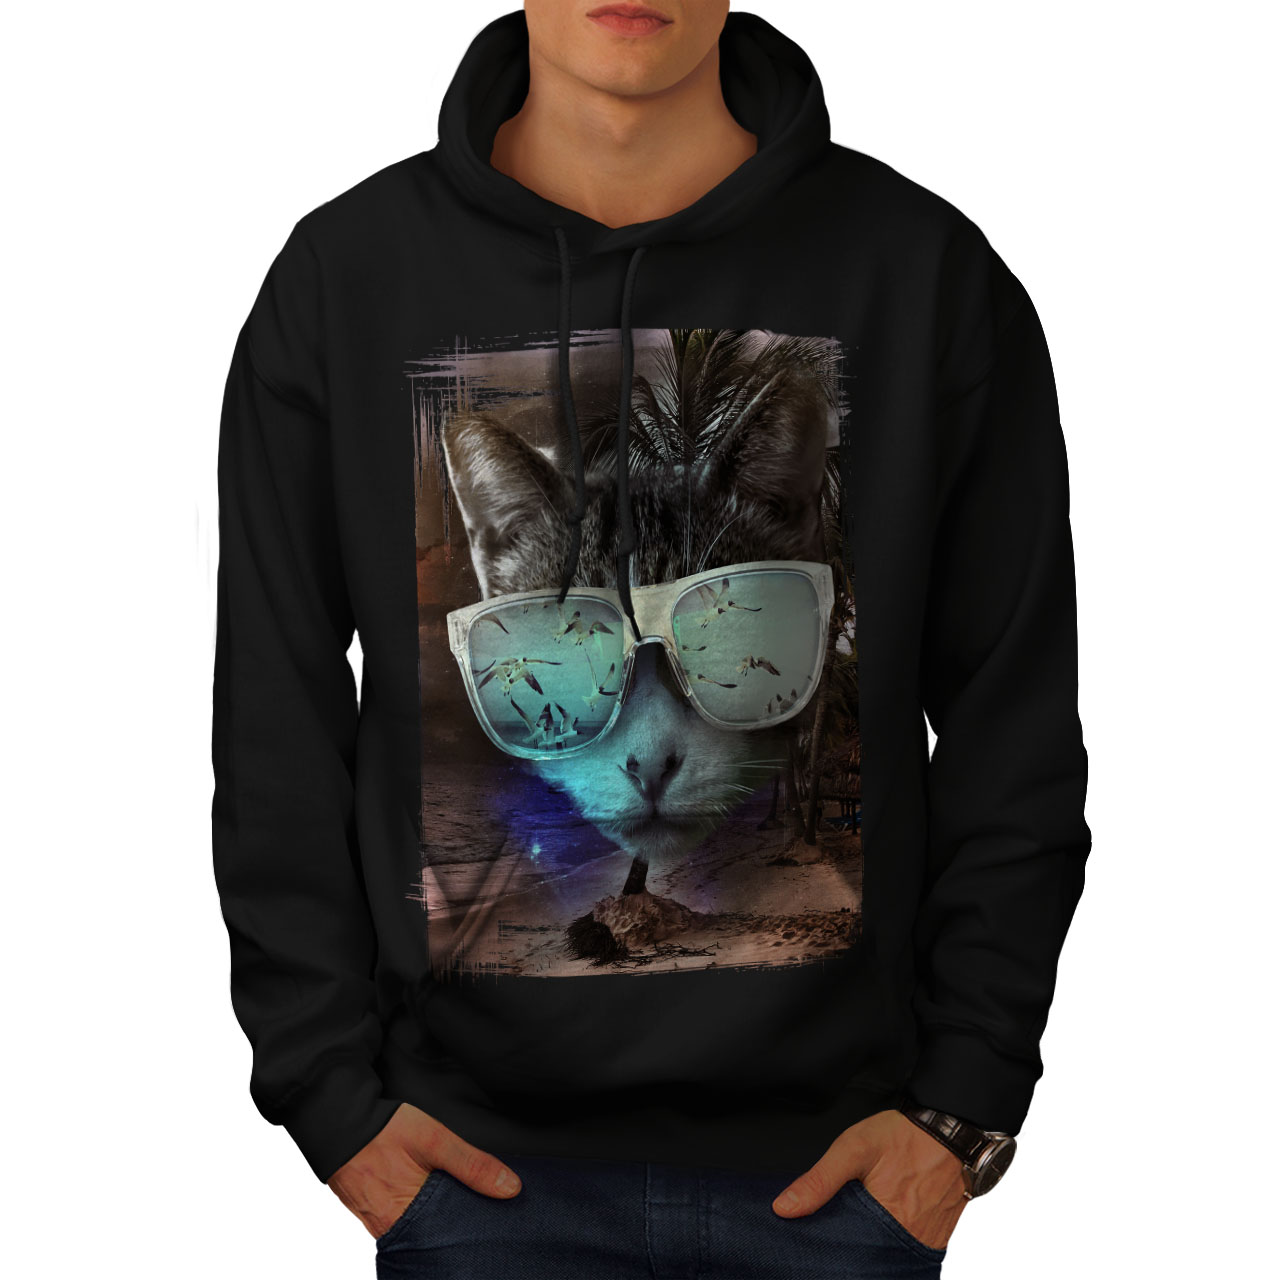 Wellcoda Mr Right Cool Funny Mens Contrast Hoodie Funny Casual Jumper